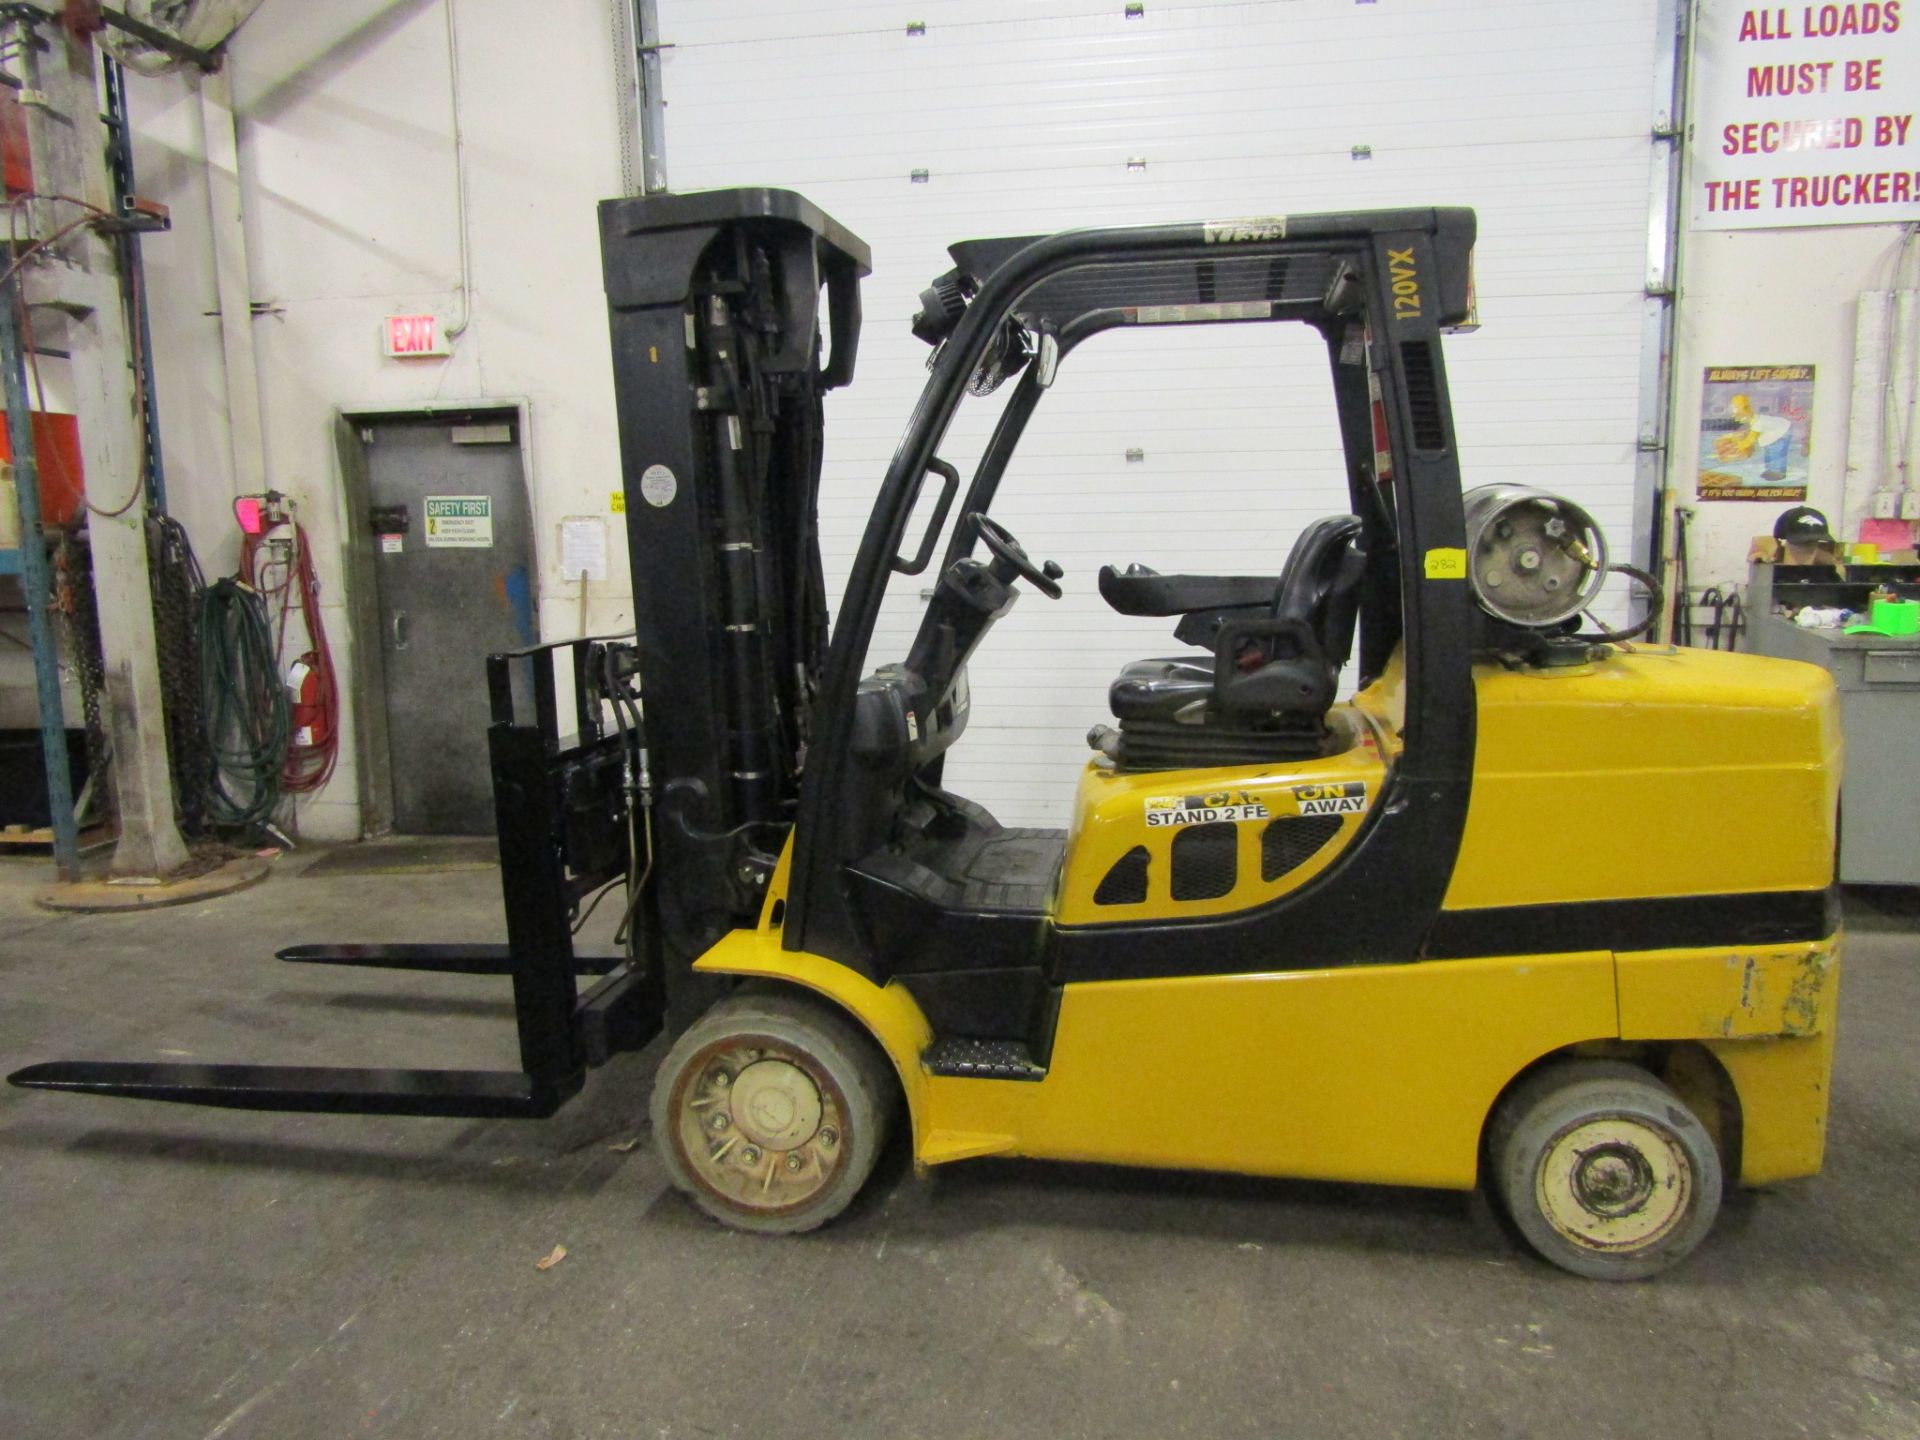 2014 Yale 12000lbs Capacity Forklift with 3-stage mast - LPG (propane) with sideshift & fork